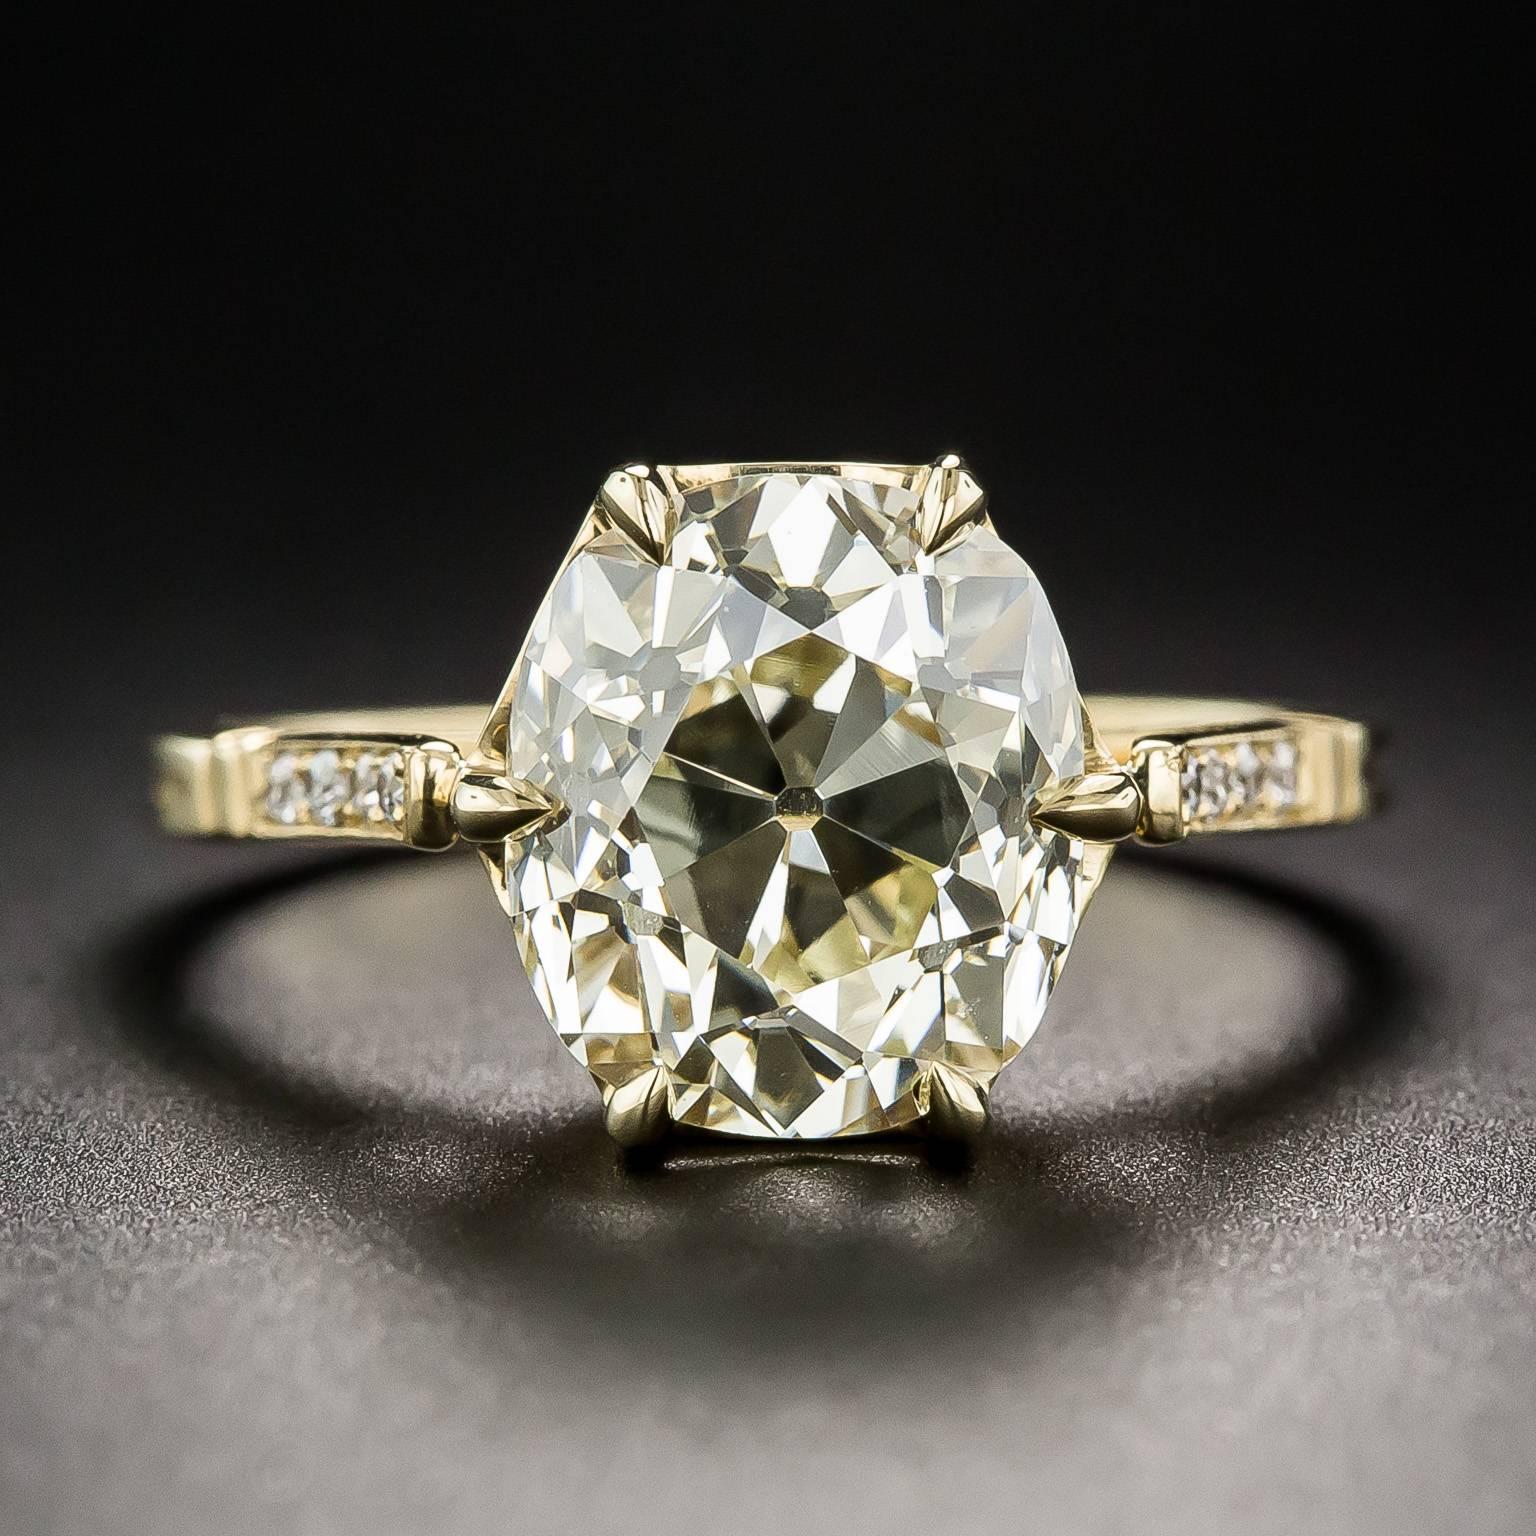 A gorgeous, original, antique cushion-cut diamond, weighing 4.10 carats, cut during the 1920s-30s, has found a new home in an elegantly understated mounting, hand-fabricated in 18K yellow gold to meld with the sunshiny tinge of the diamond. The